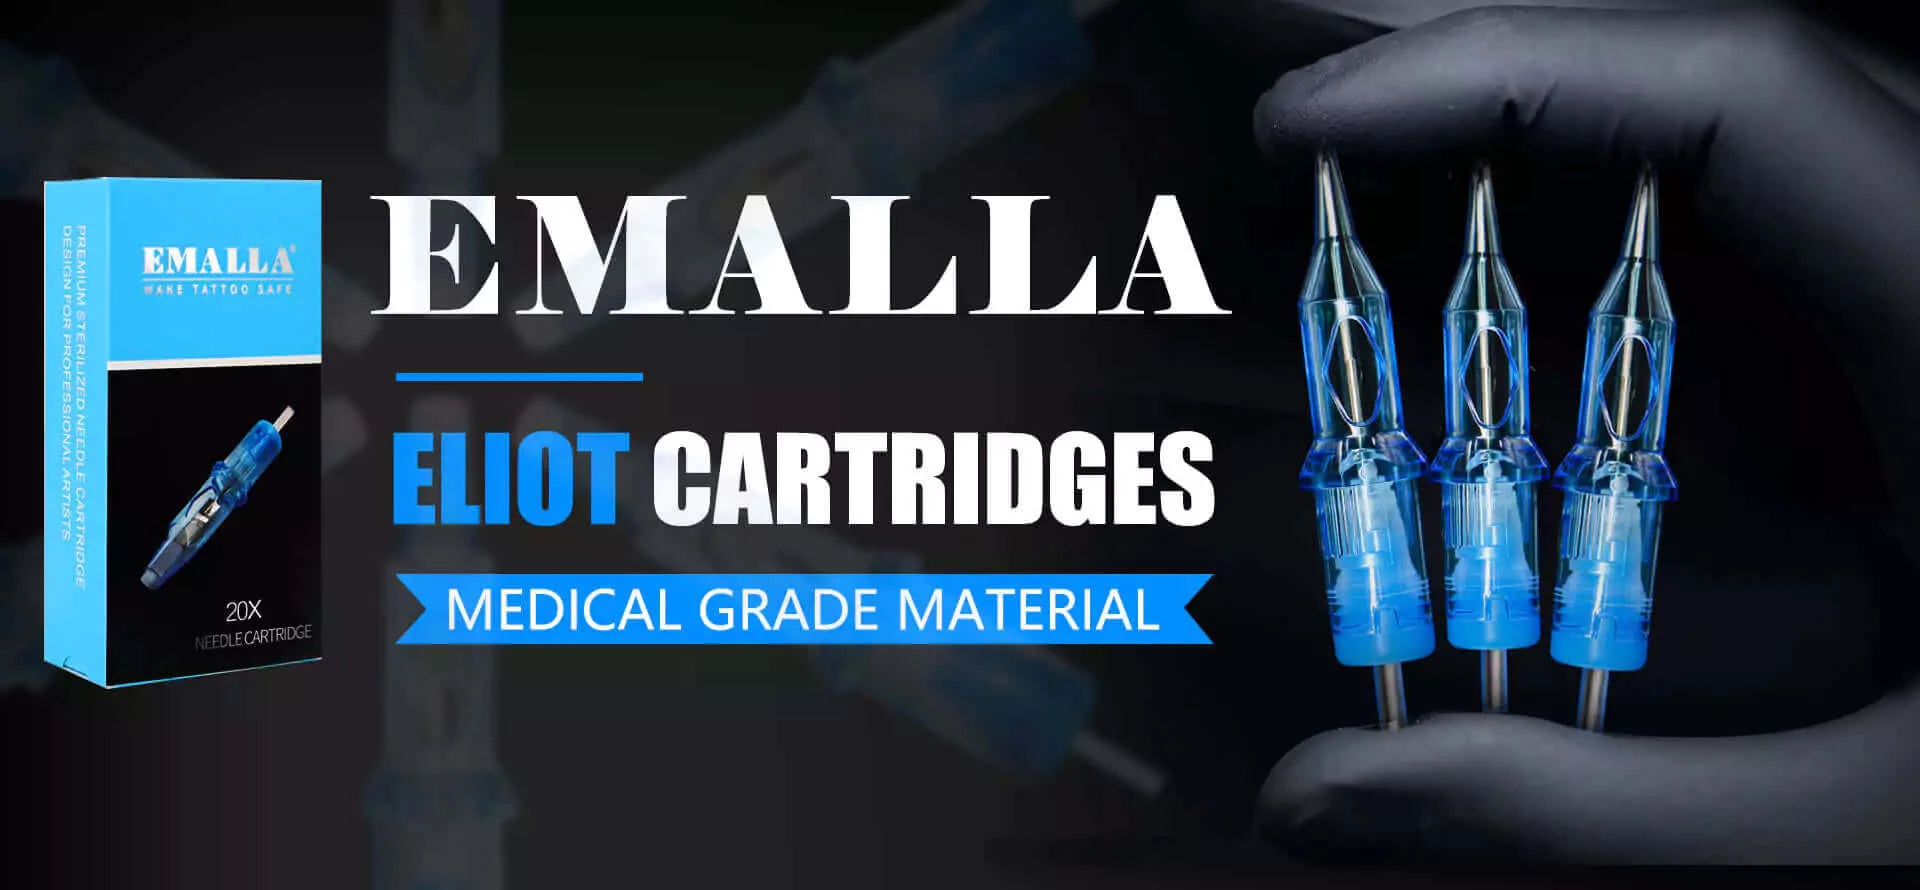 Emalla Eliot Cartridges made with medical grade material